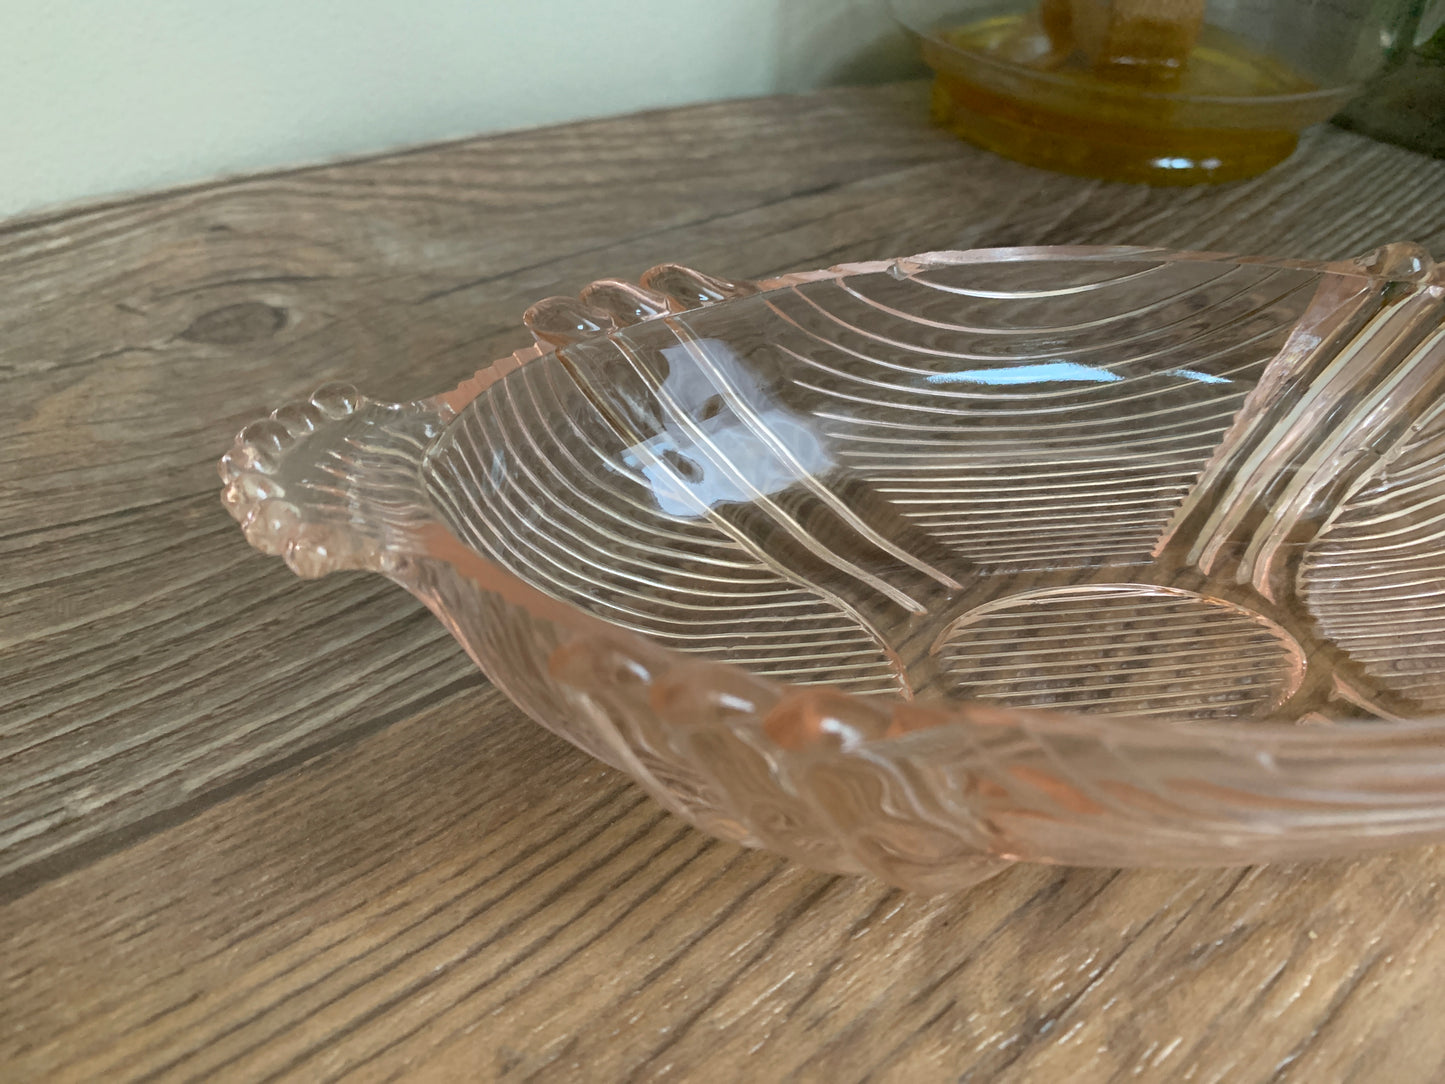 Pink Depression Glass Oval Dish with Beaded Handles Vintage Glass Jewelry Dish Catch All